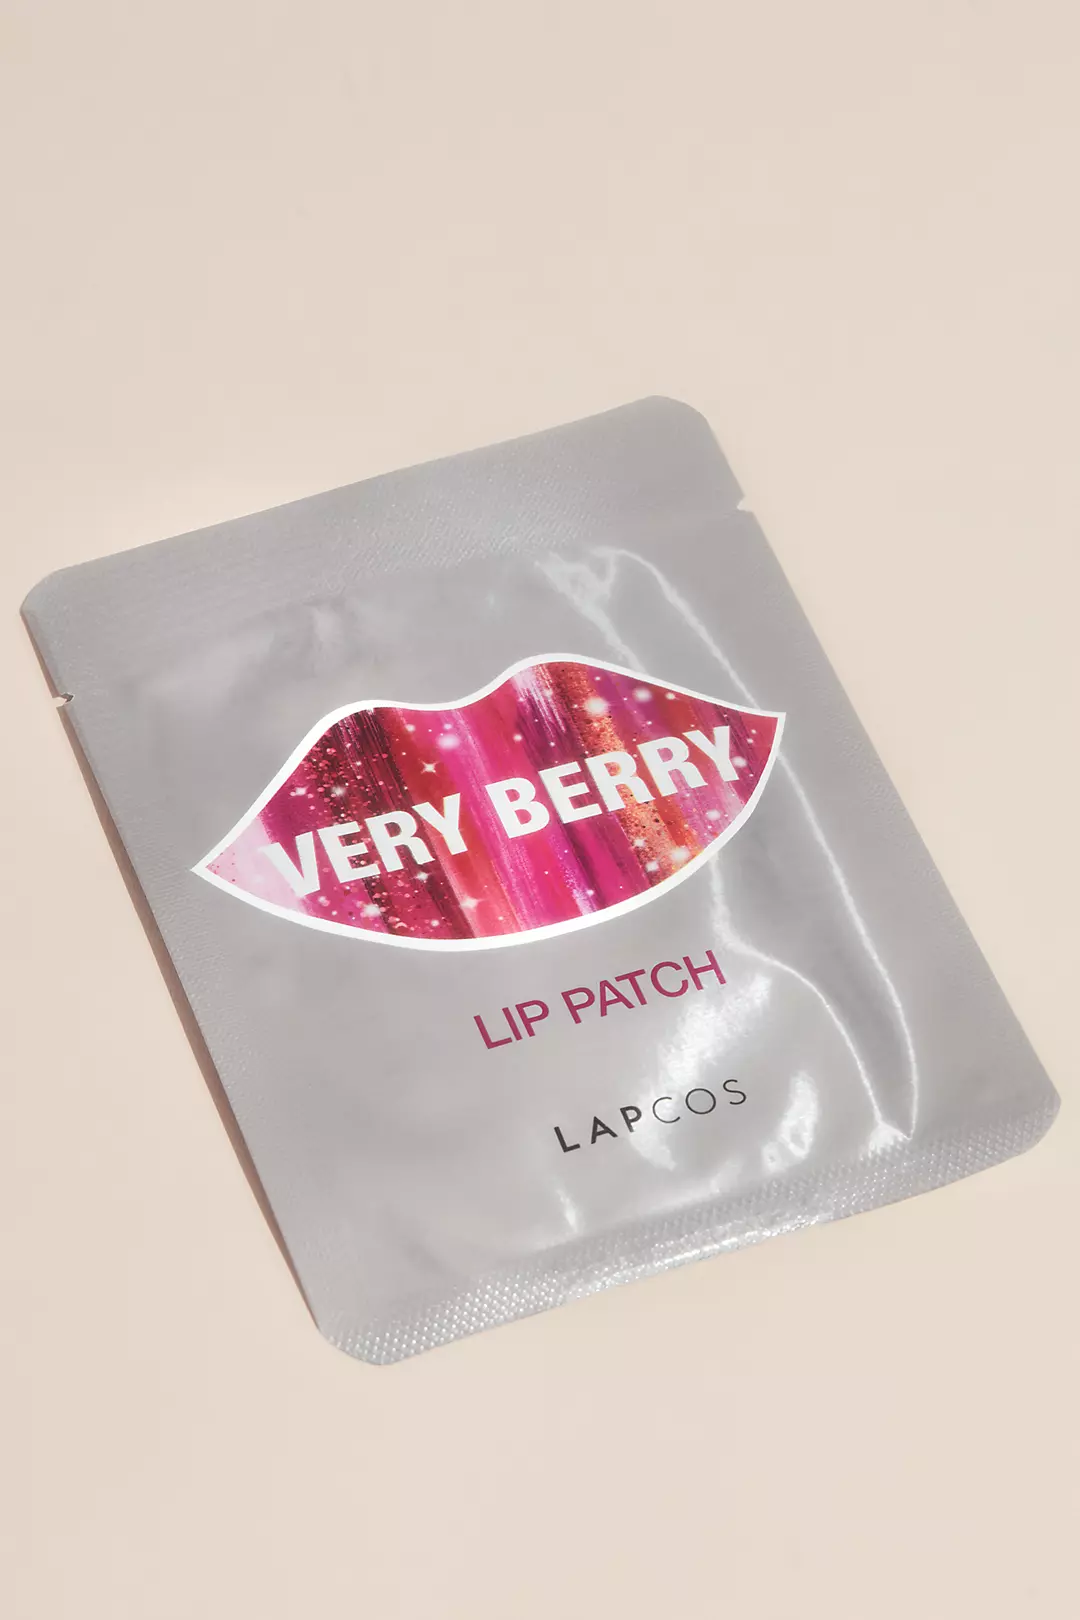 Lapcos Very Berry Lip Patch Mask Image